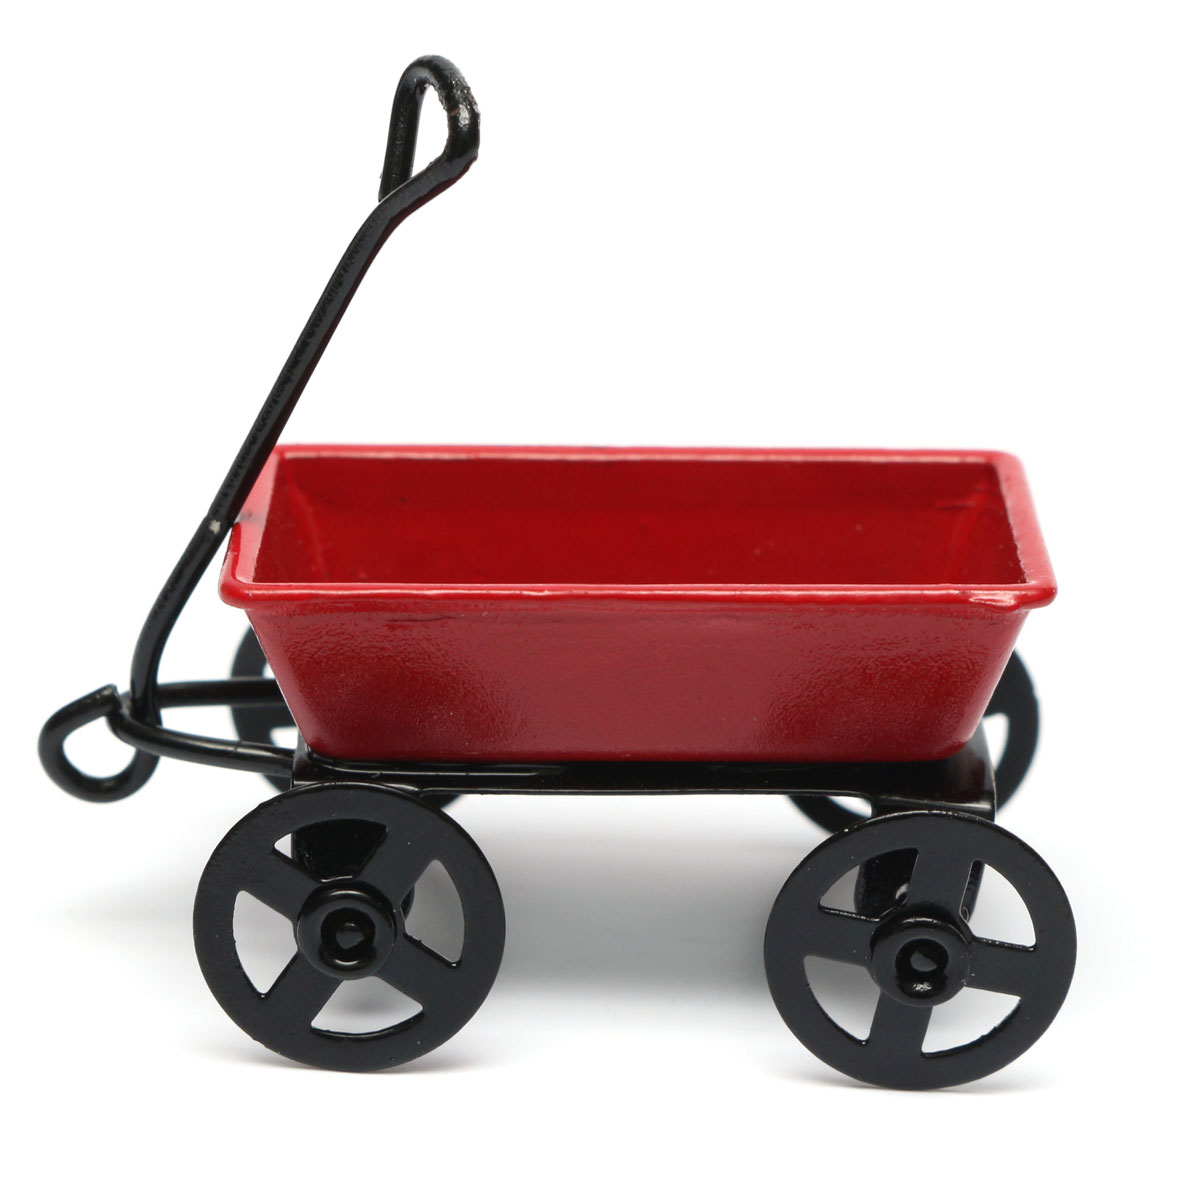 Dollhouse-Metal-Miniature-Toy-Red-Small-Pulling-Cart-Garden-Furniture-Accessories-1016288-3